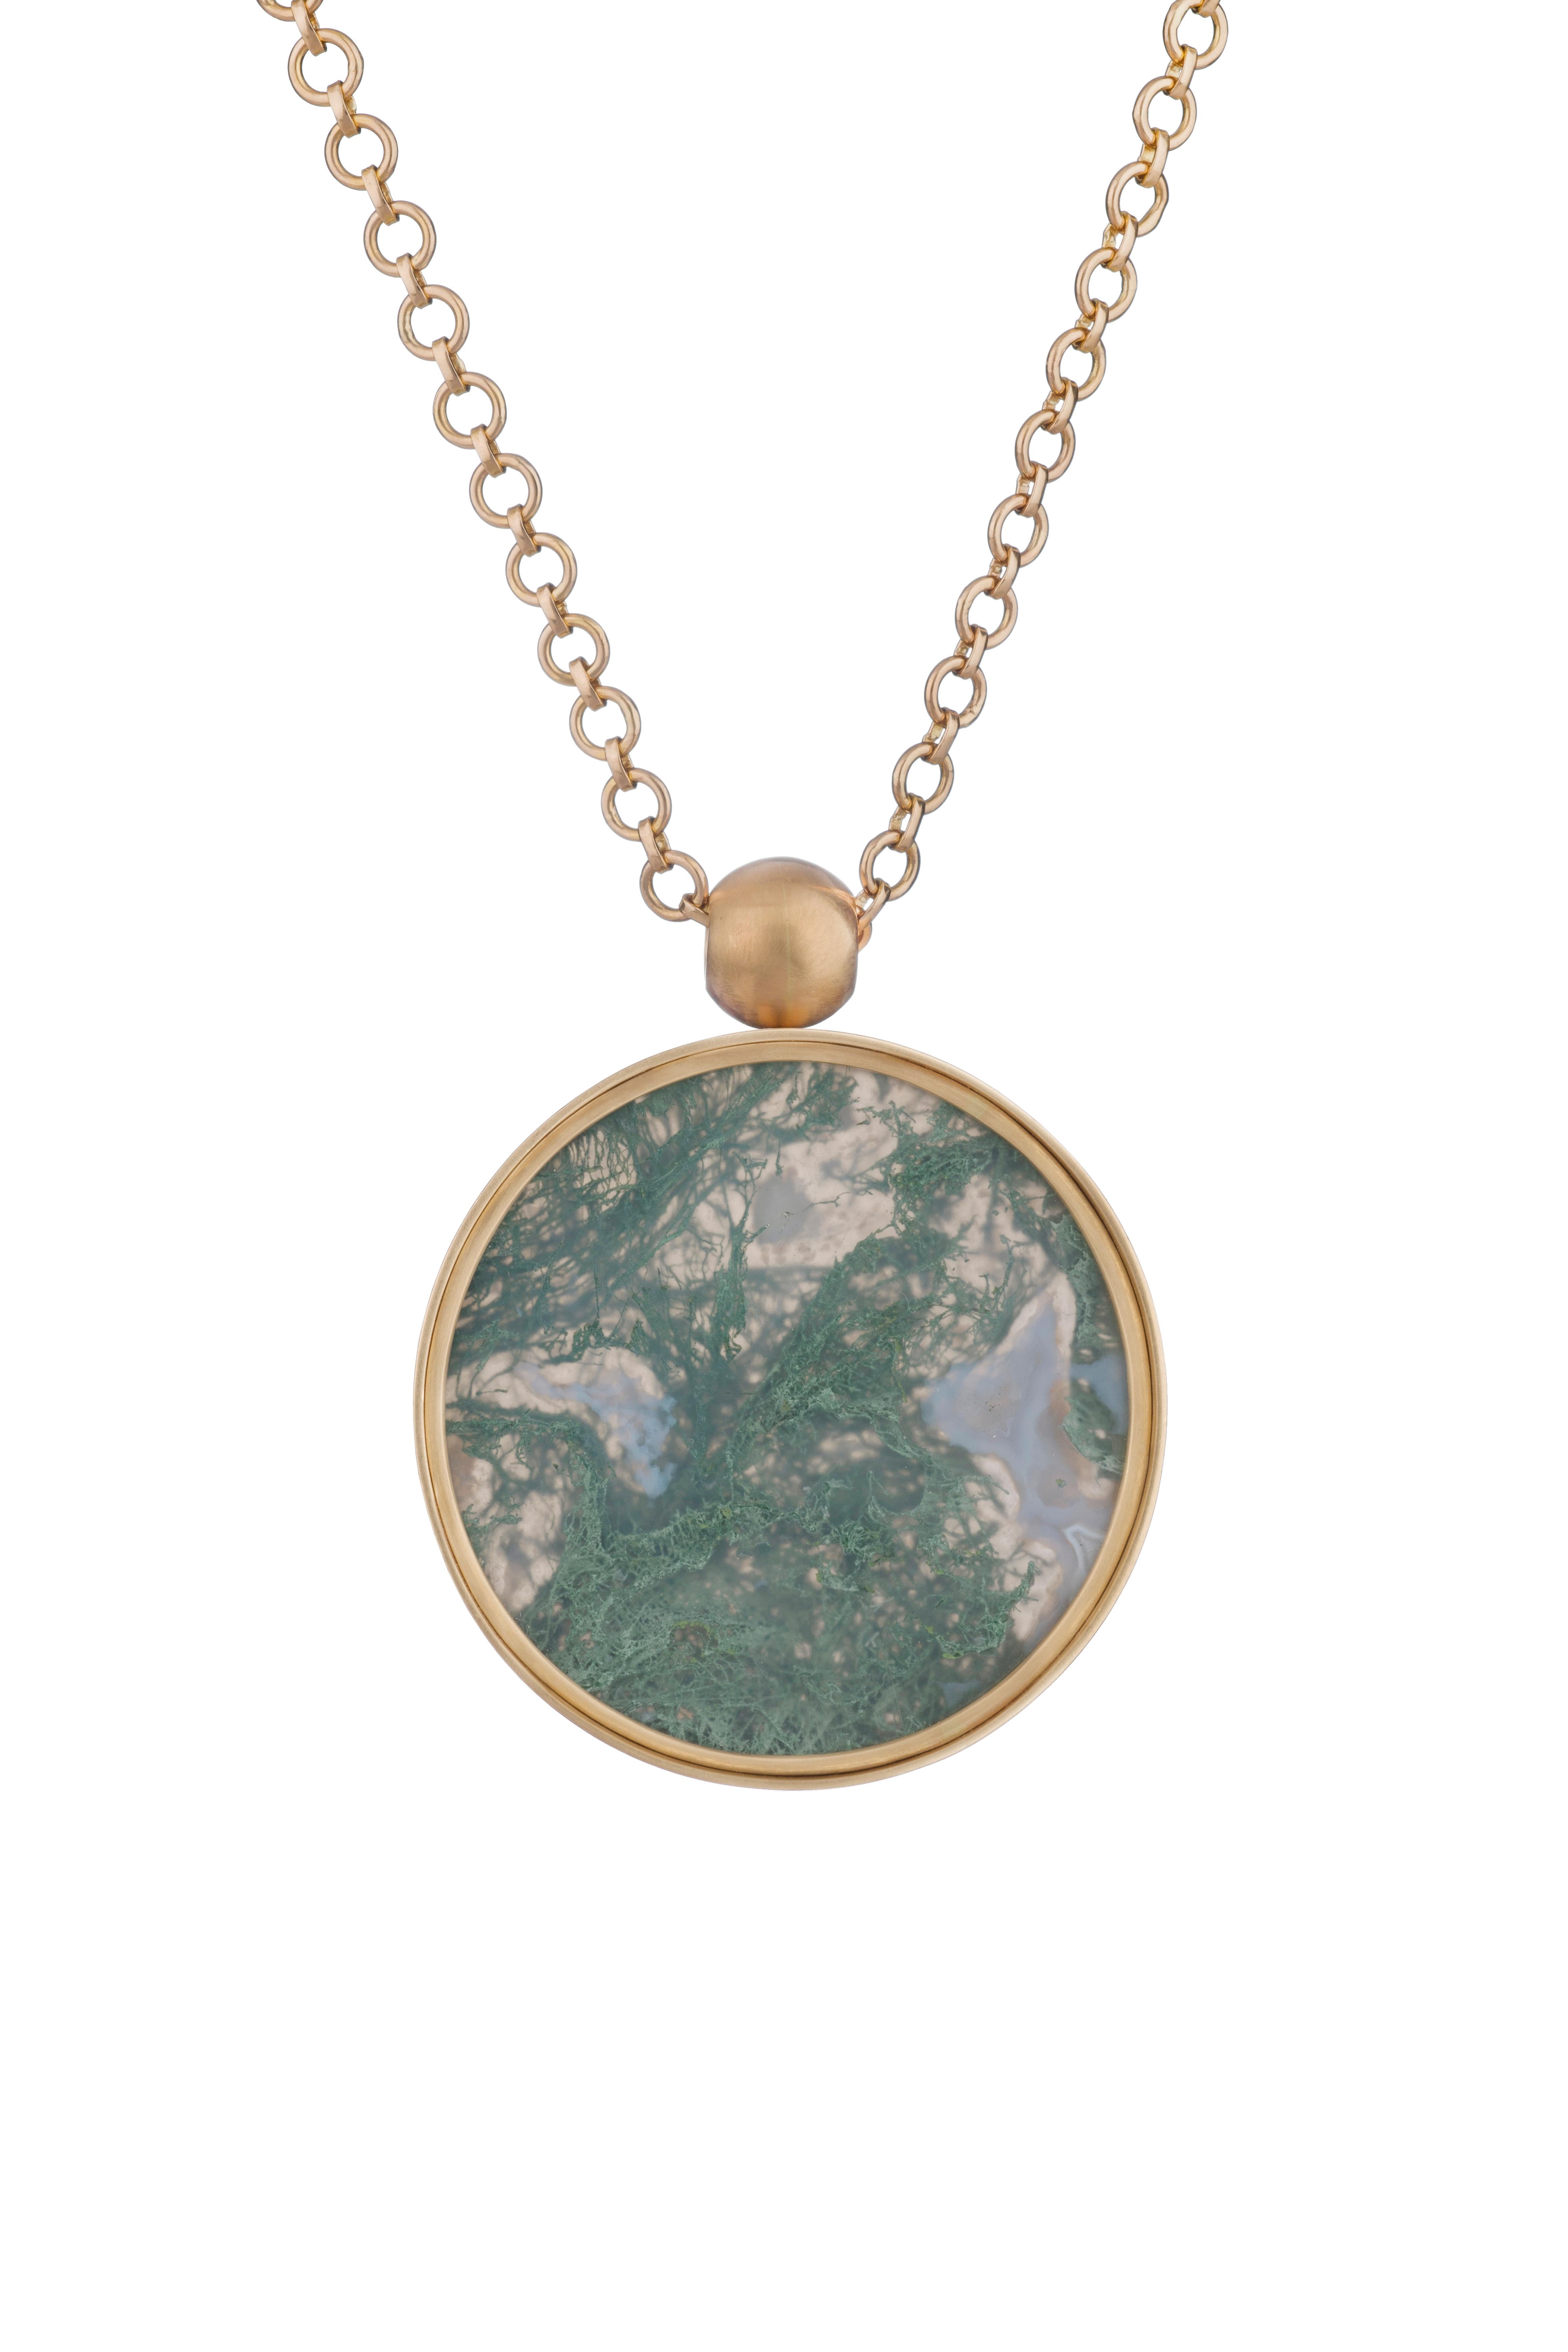 OUROBOROS' 'Swimming In Seaweed,' green moss agate pendant set in 18kt gold.

There are four chain options, all are handmade, 36